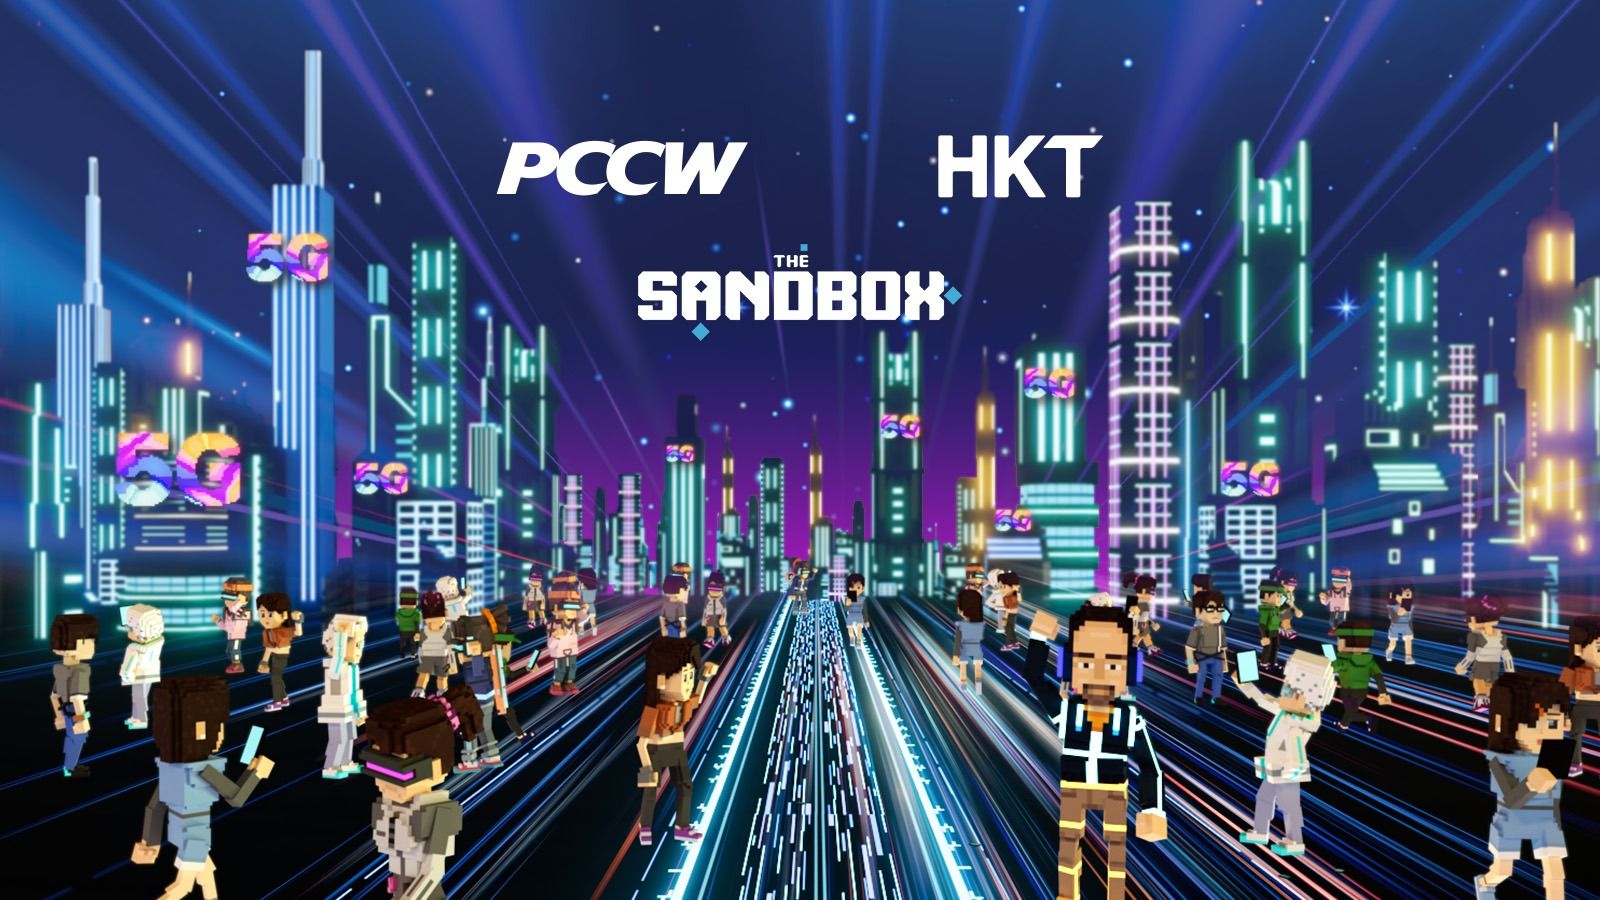 PCCW and HKT have partnered with The Sandbox, becoming the first Hong Kong-based CMT organisation to join the metaverse